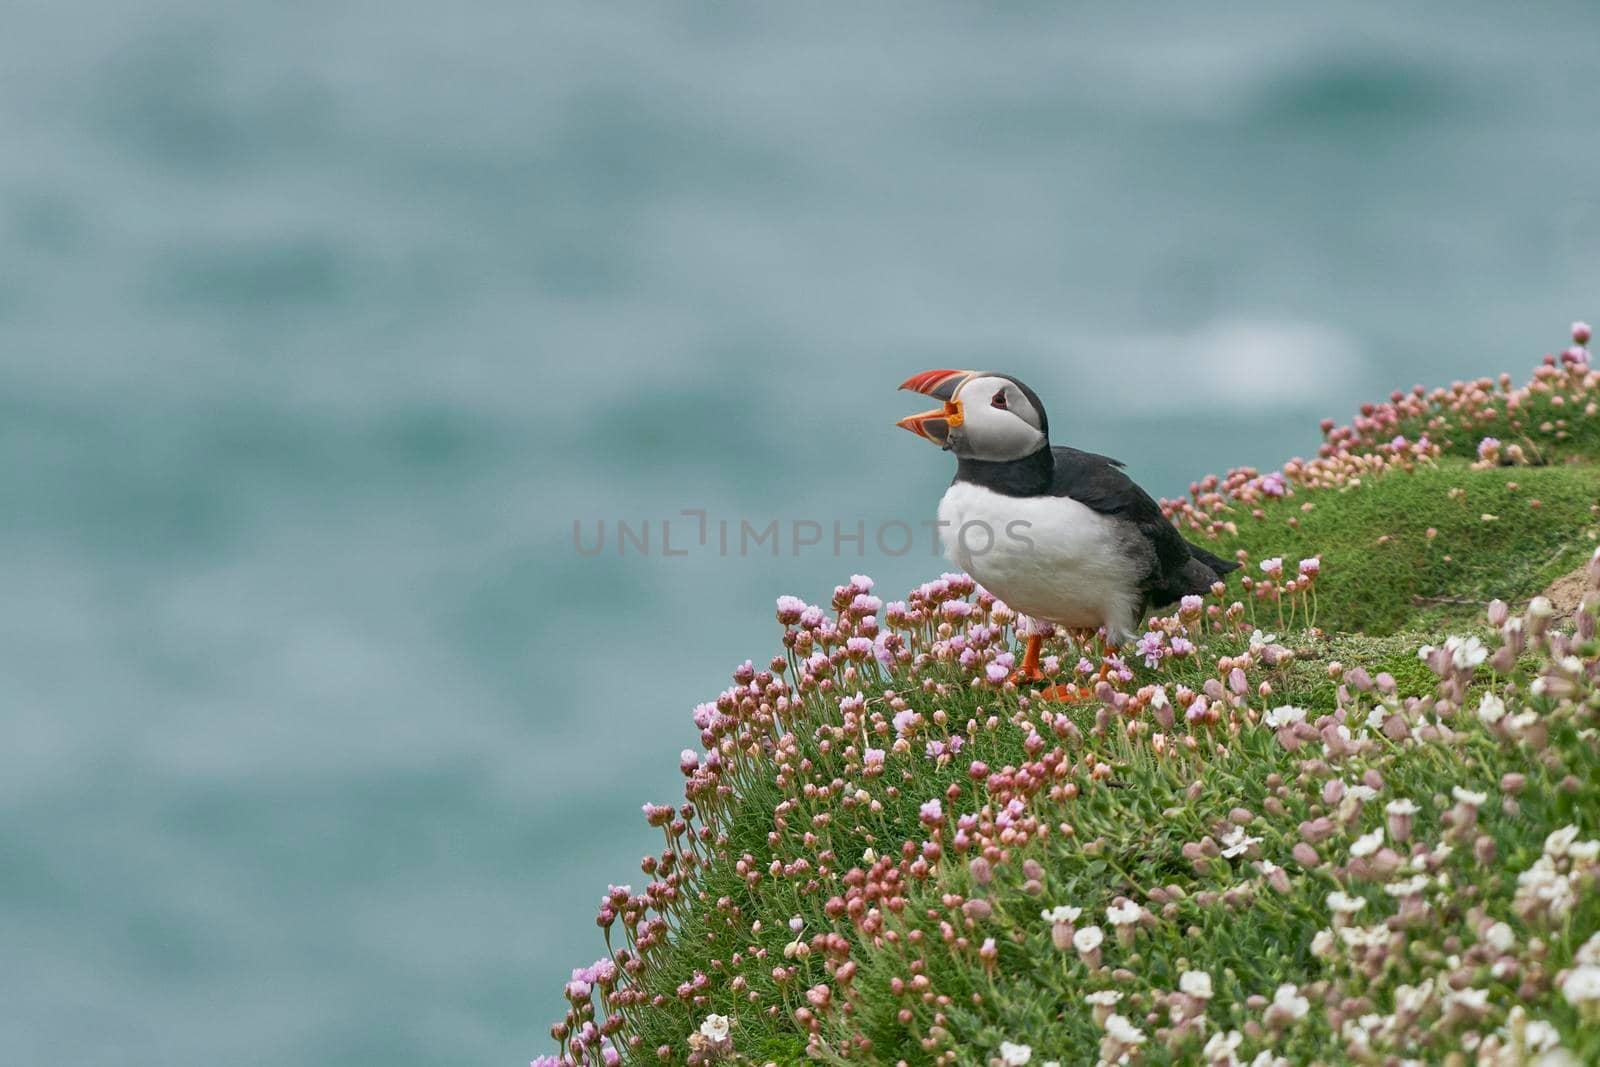 Puffin calling by JeremyRichards